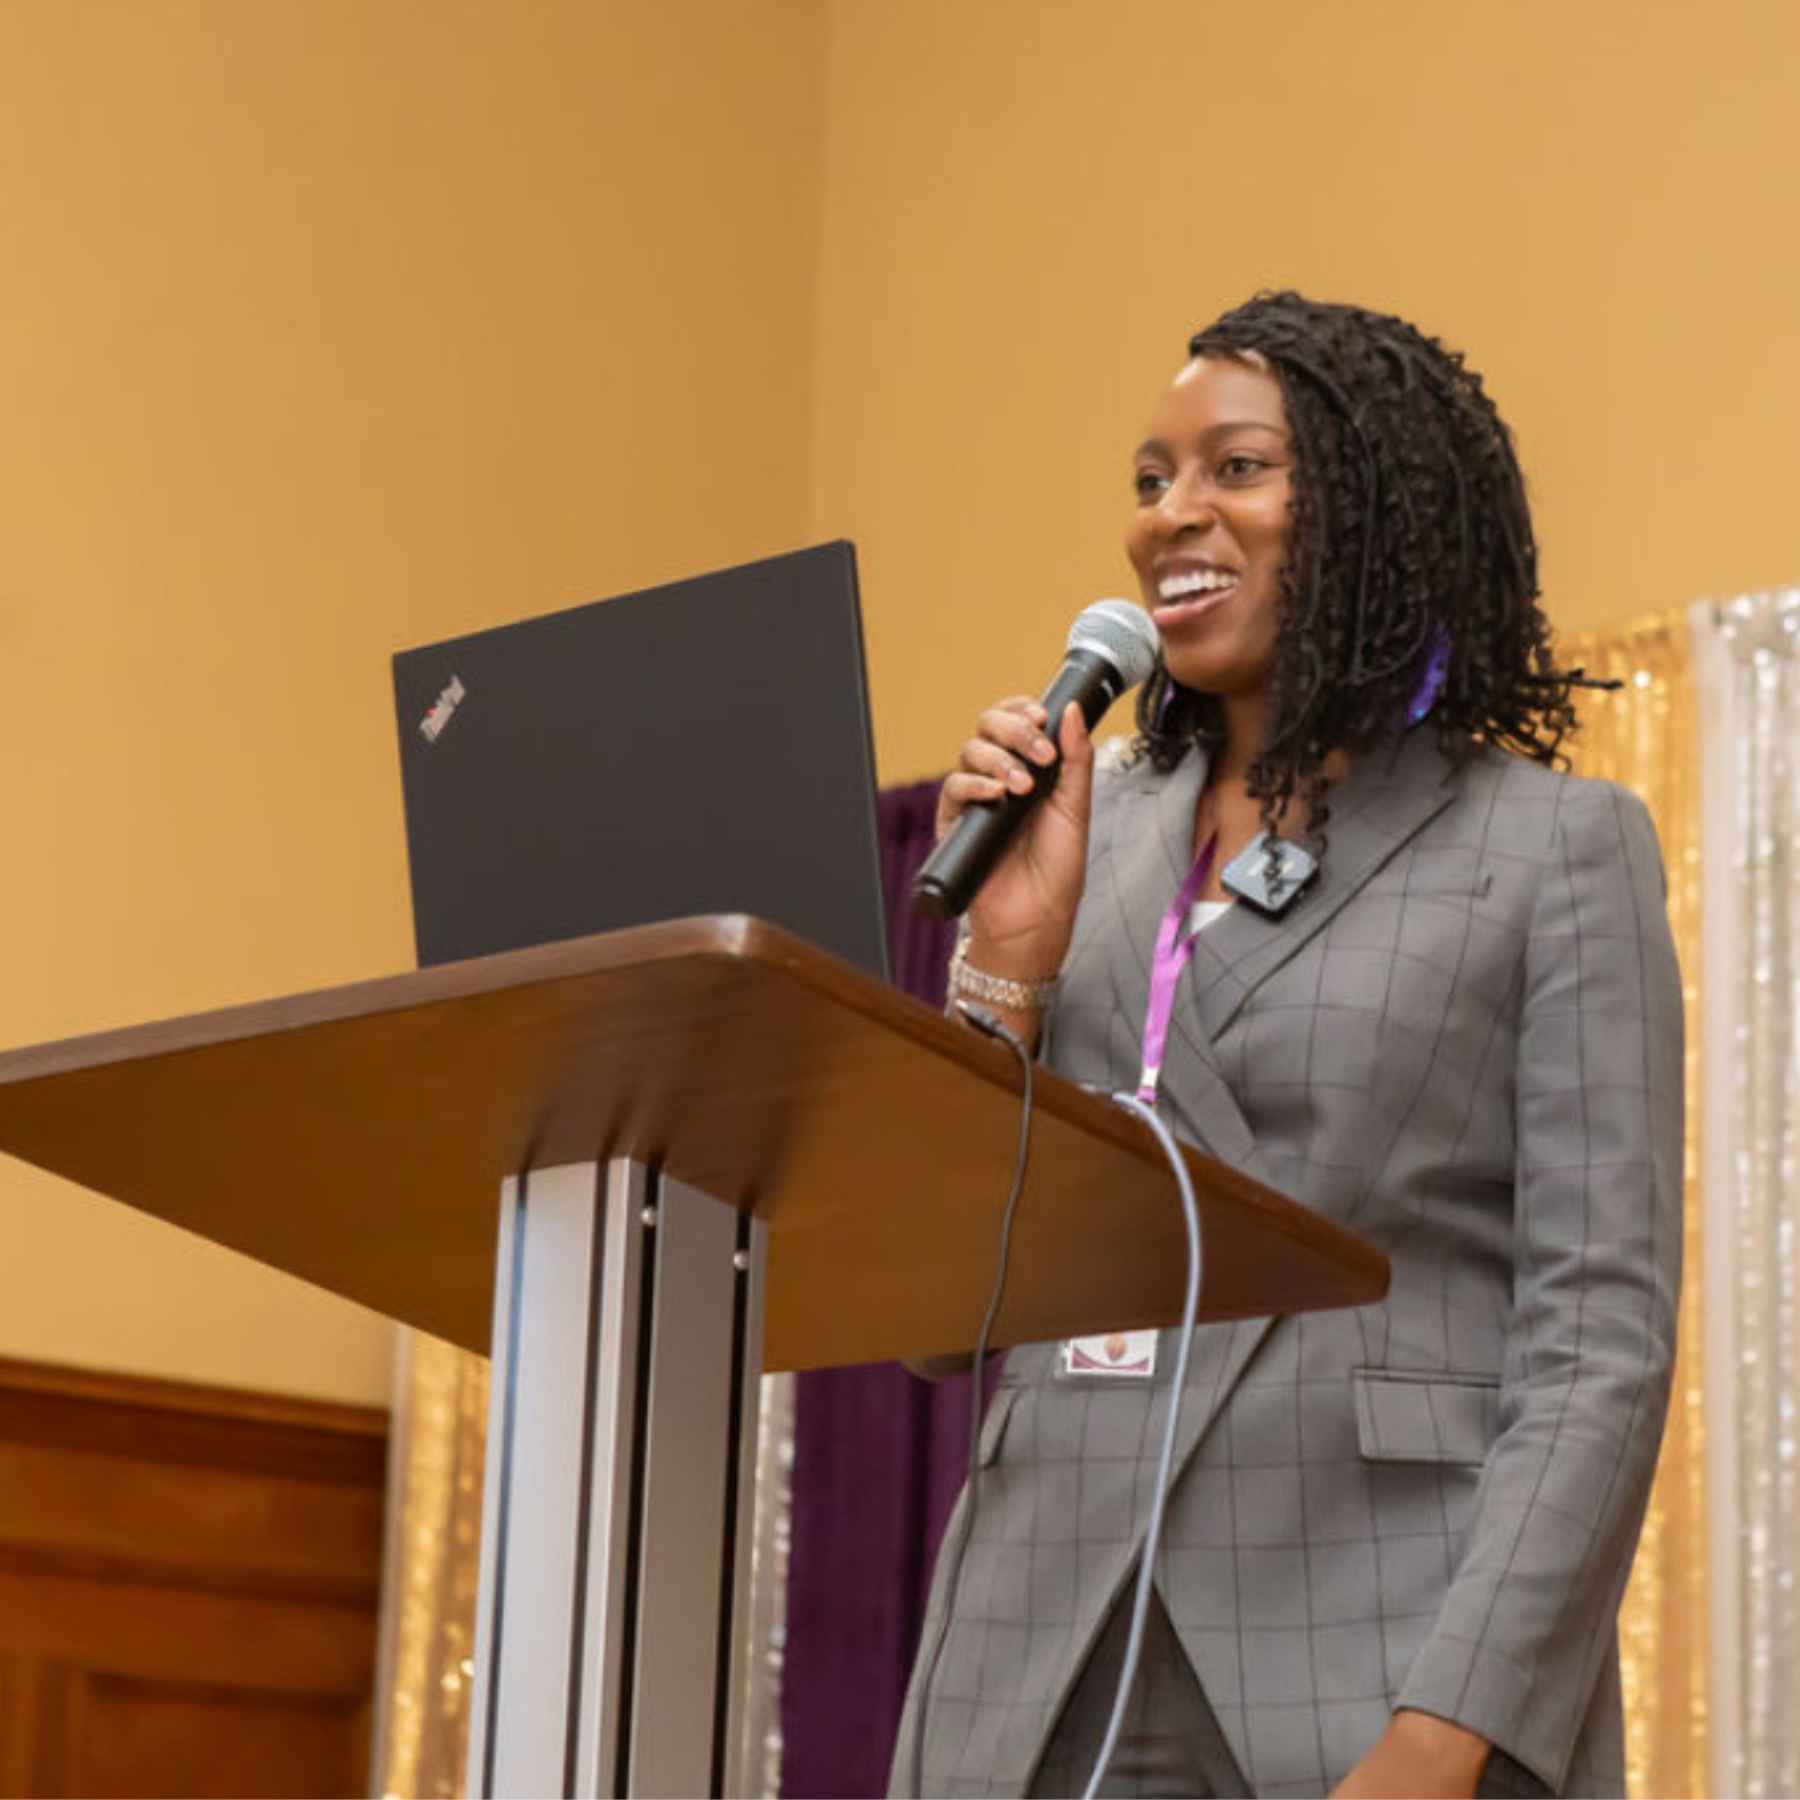 Catina Morrison, brown skinned professional woman with natural hair in grey suit with purple pinstripes speaking with a microphone in her hand while speaking at a podium.